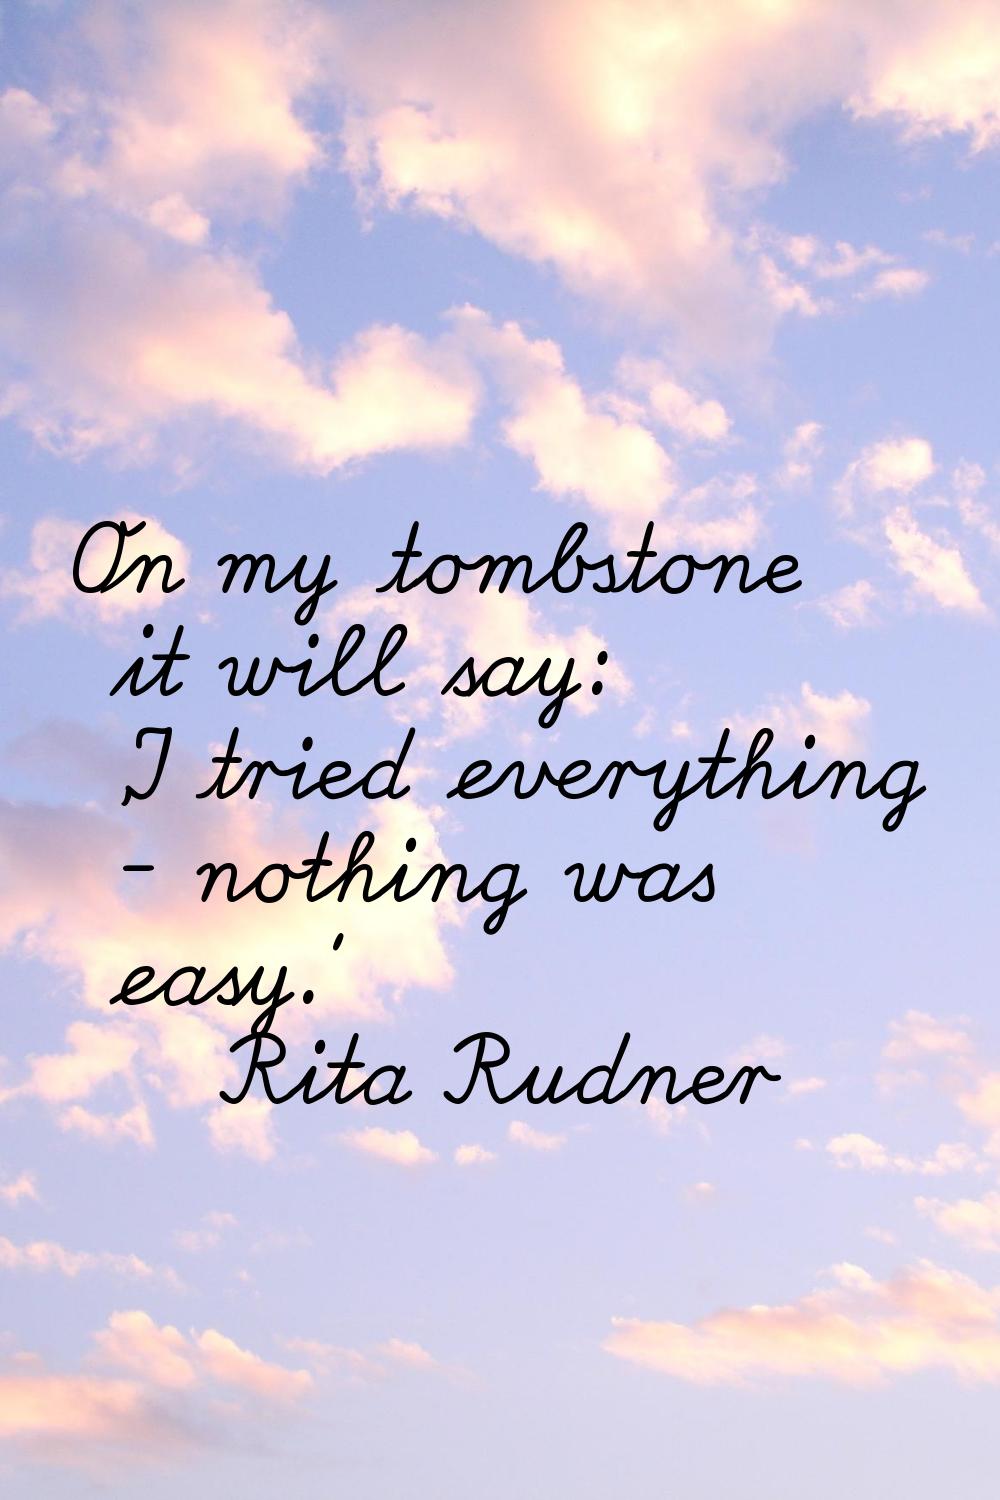 On my tombstone it will say: 'I tried everything - nothing was easy.'